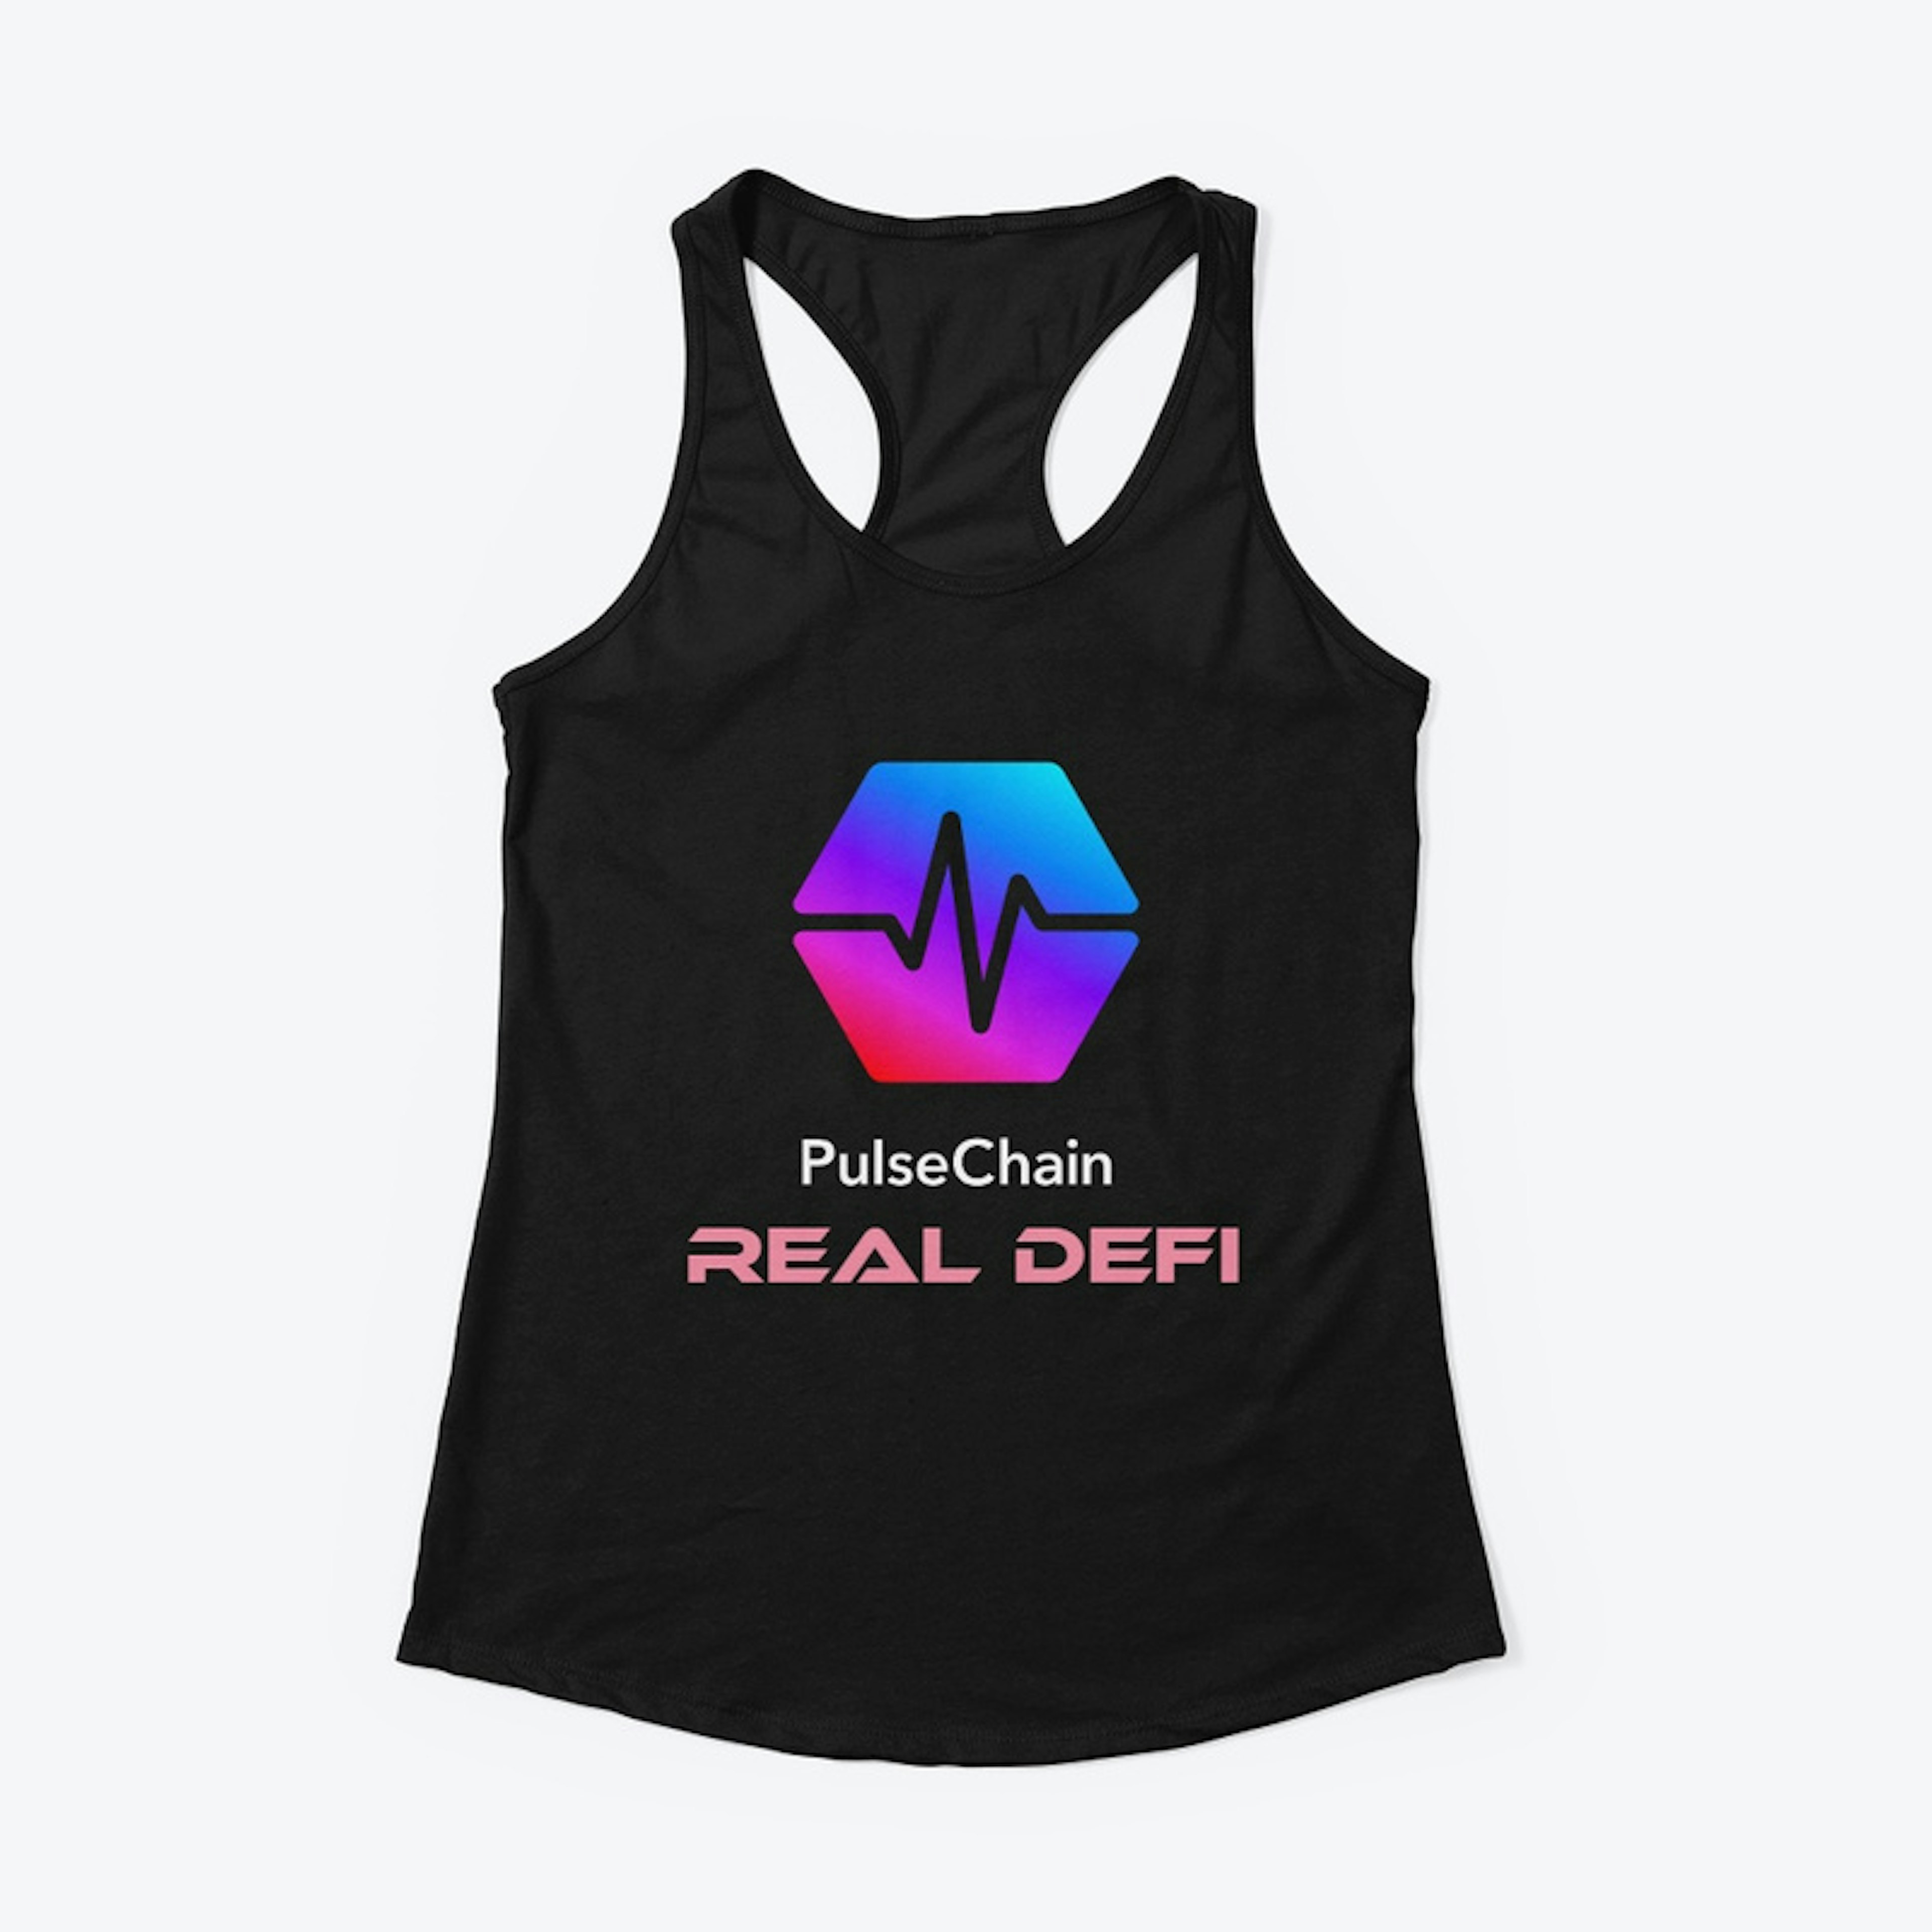 PulseChain "Real DeFi" Collection